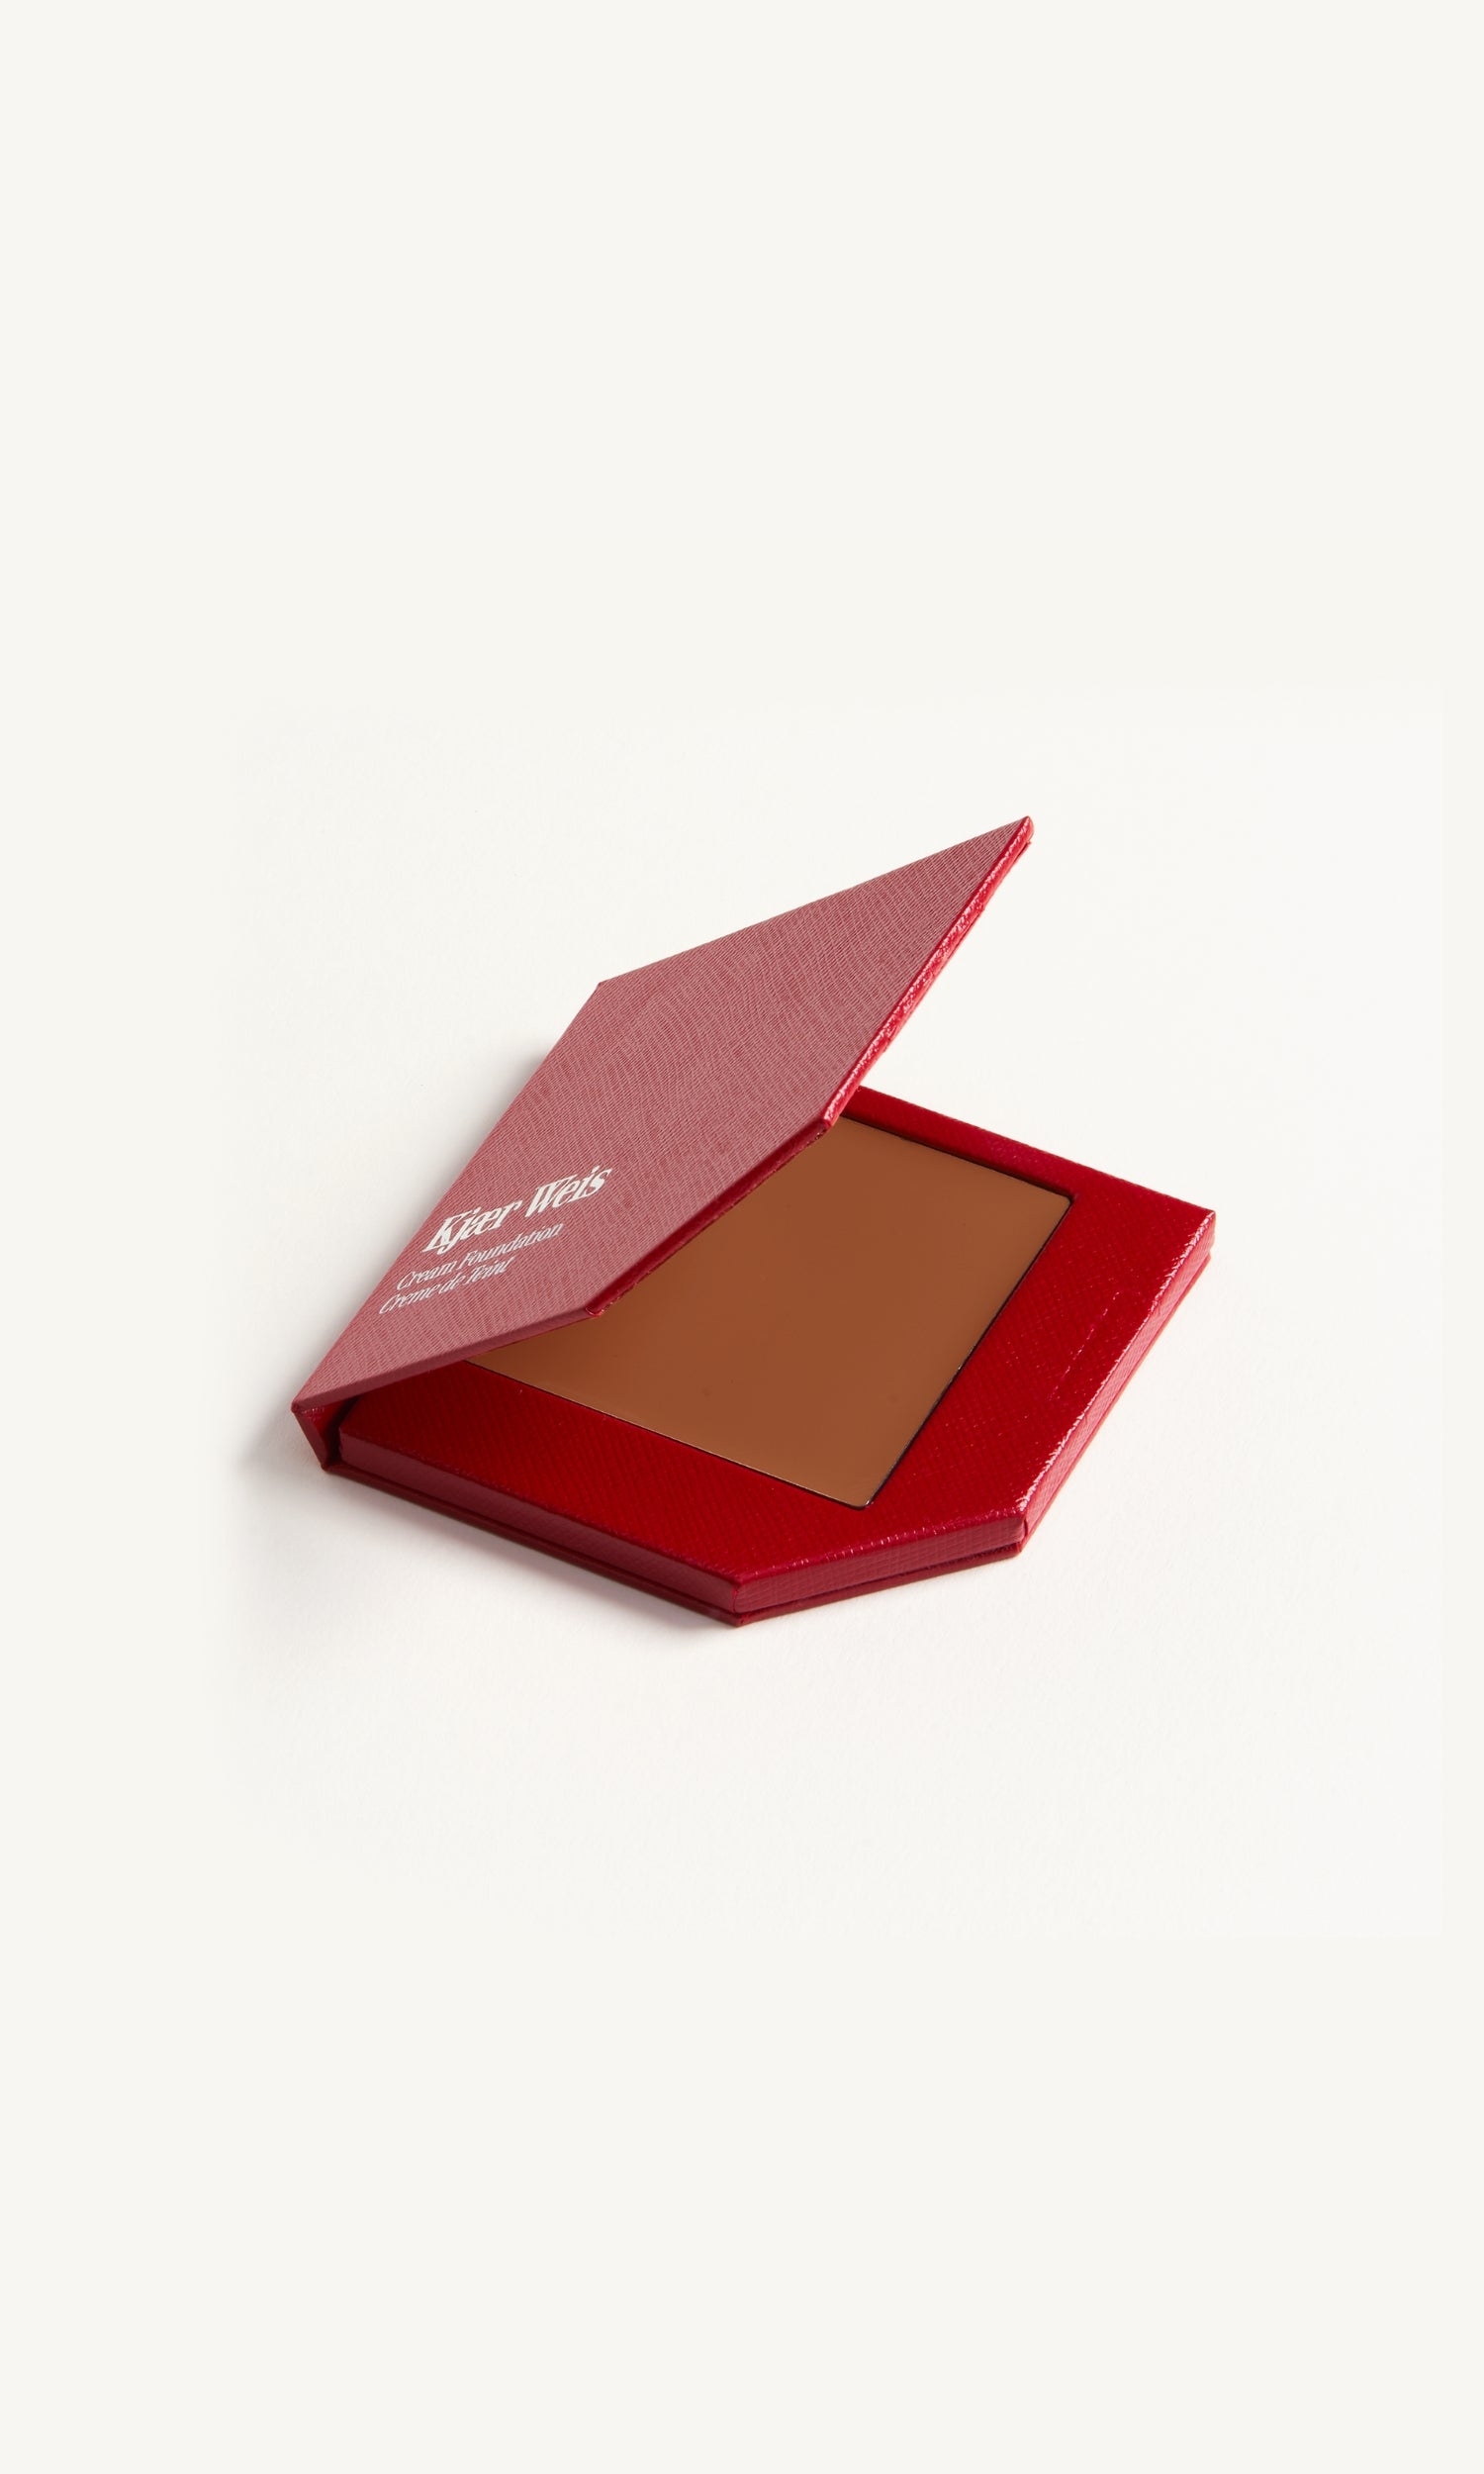 red kw palette with lid open to show cream foundation 